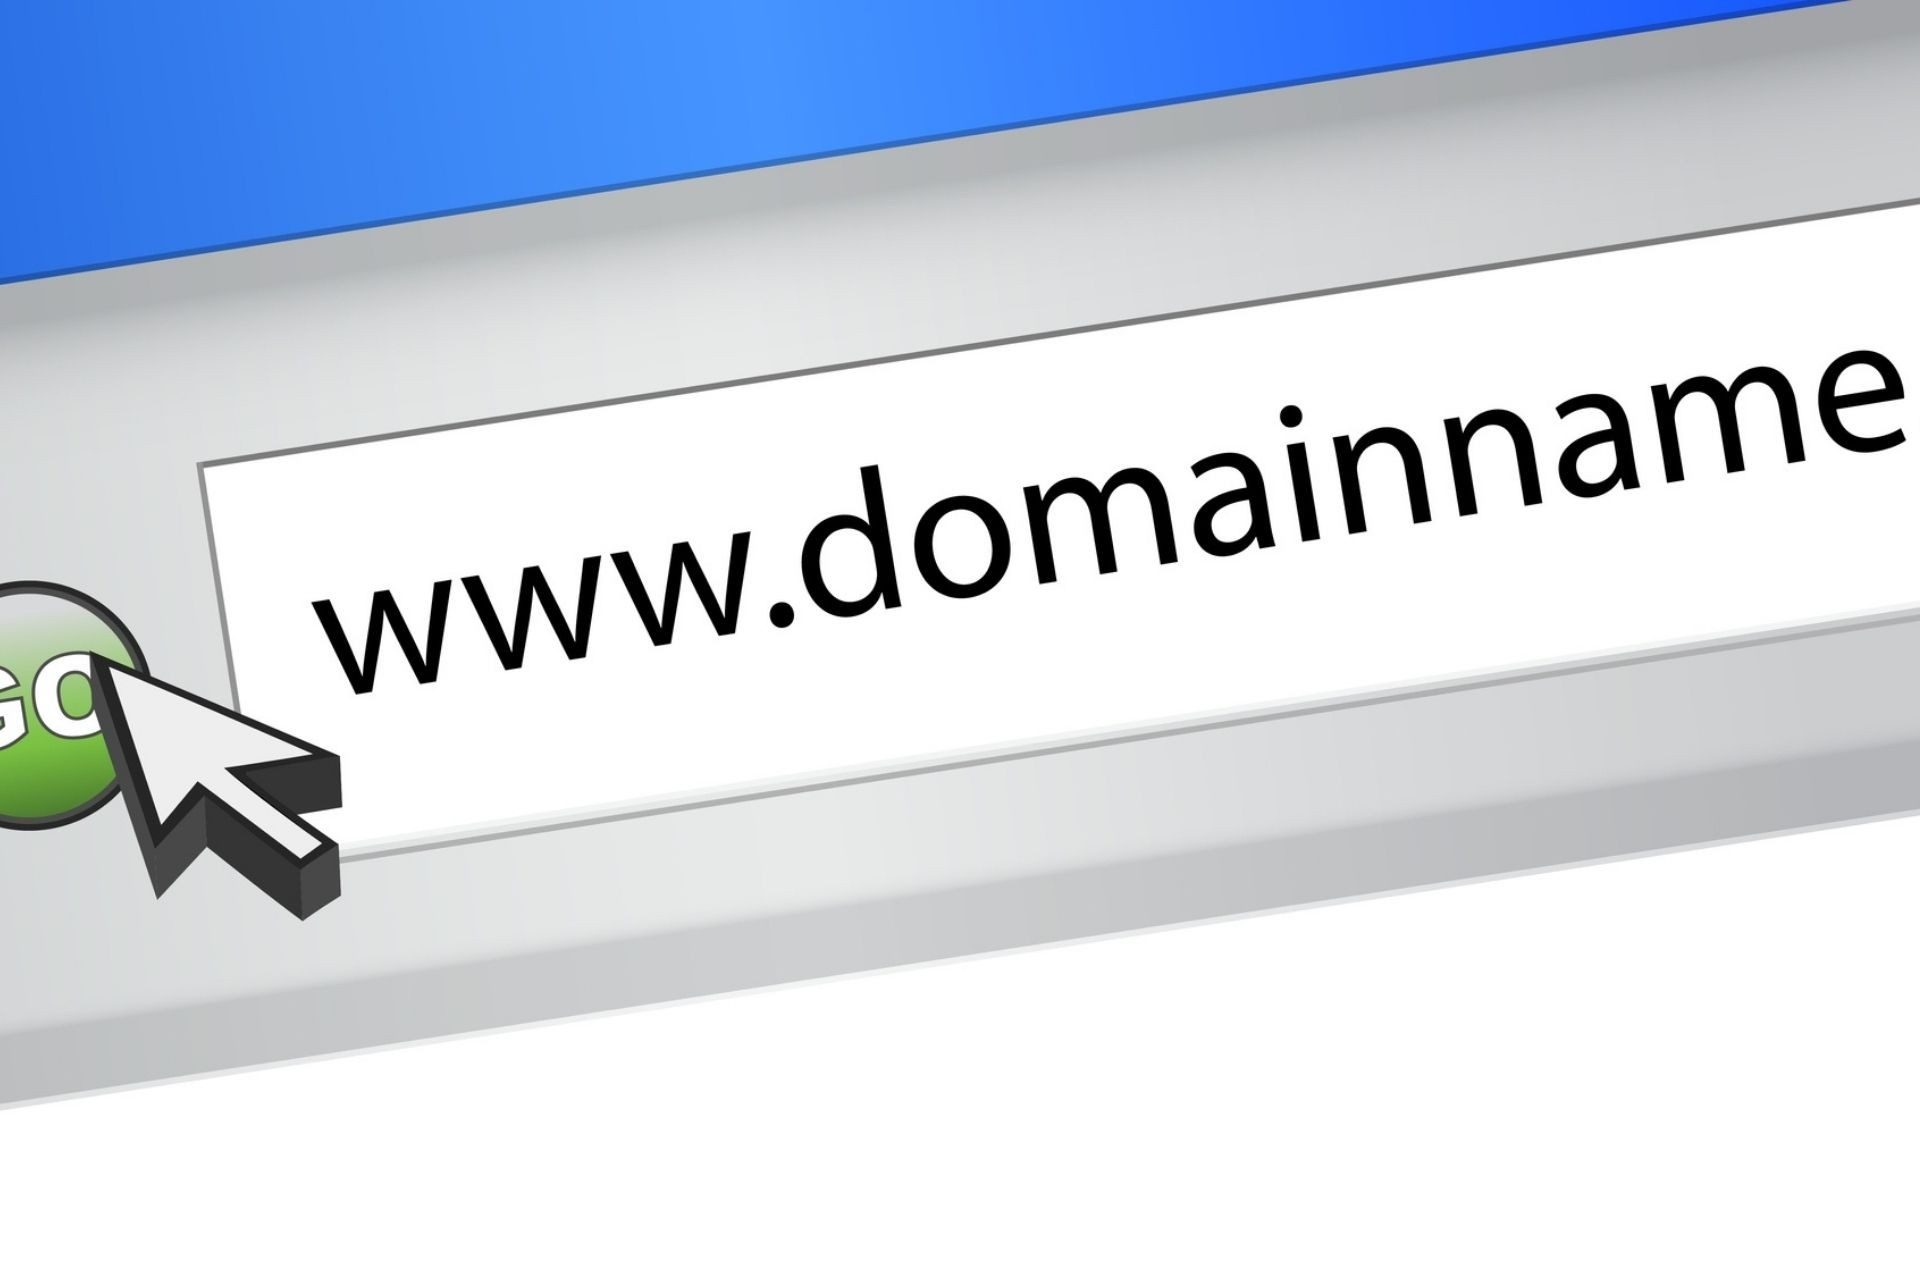 What to Do If the Domain Name You Want Is Taken